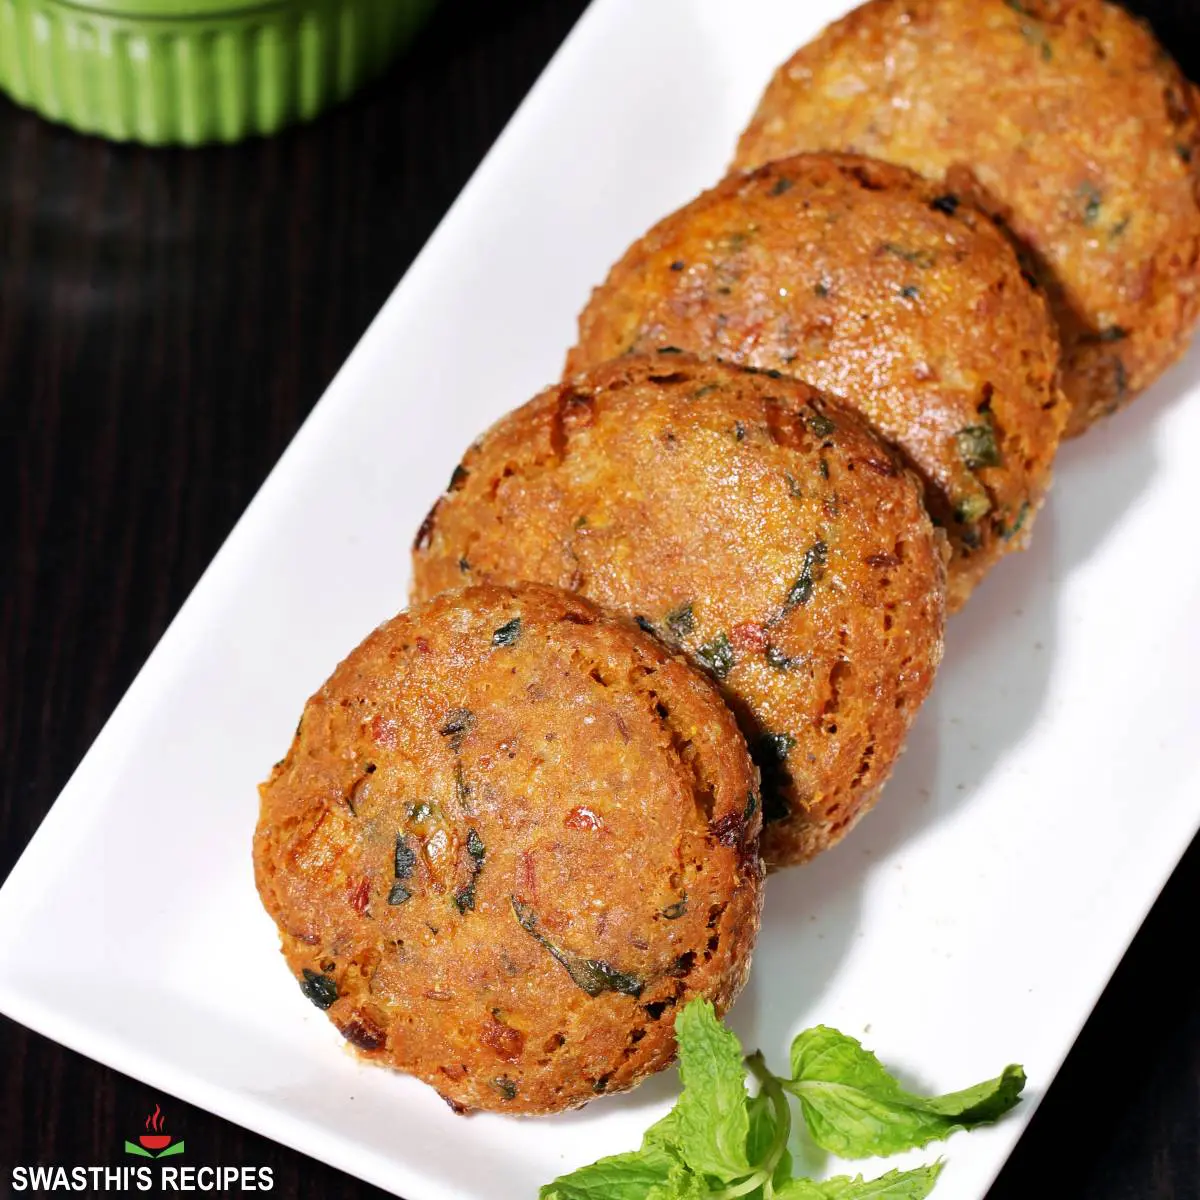 shami kabab also known as shami kebab made with meat